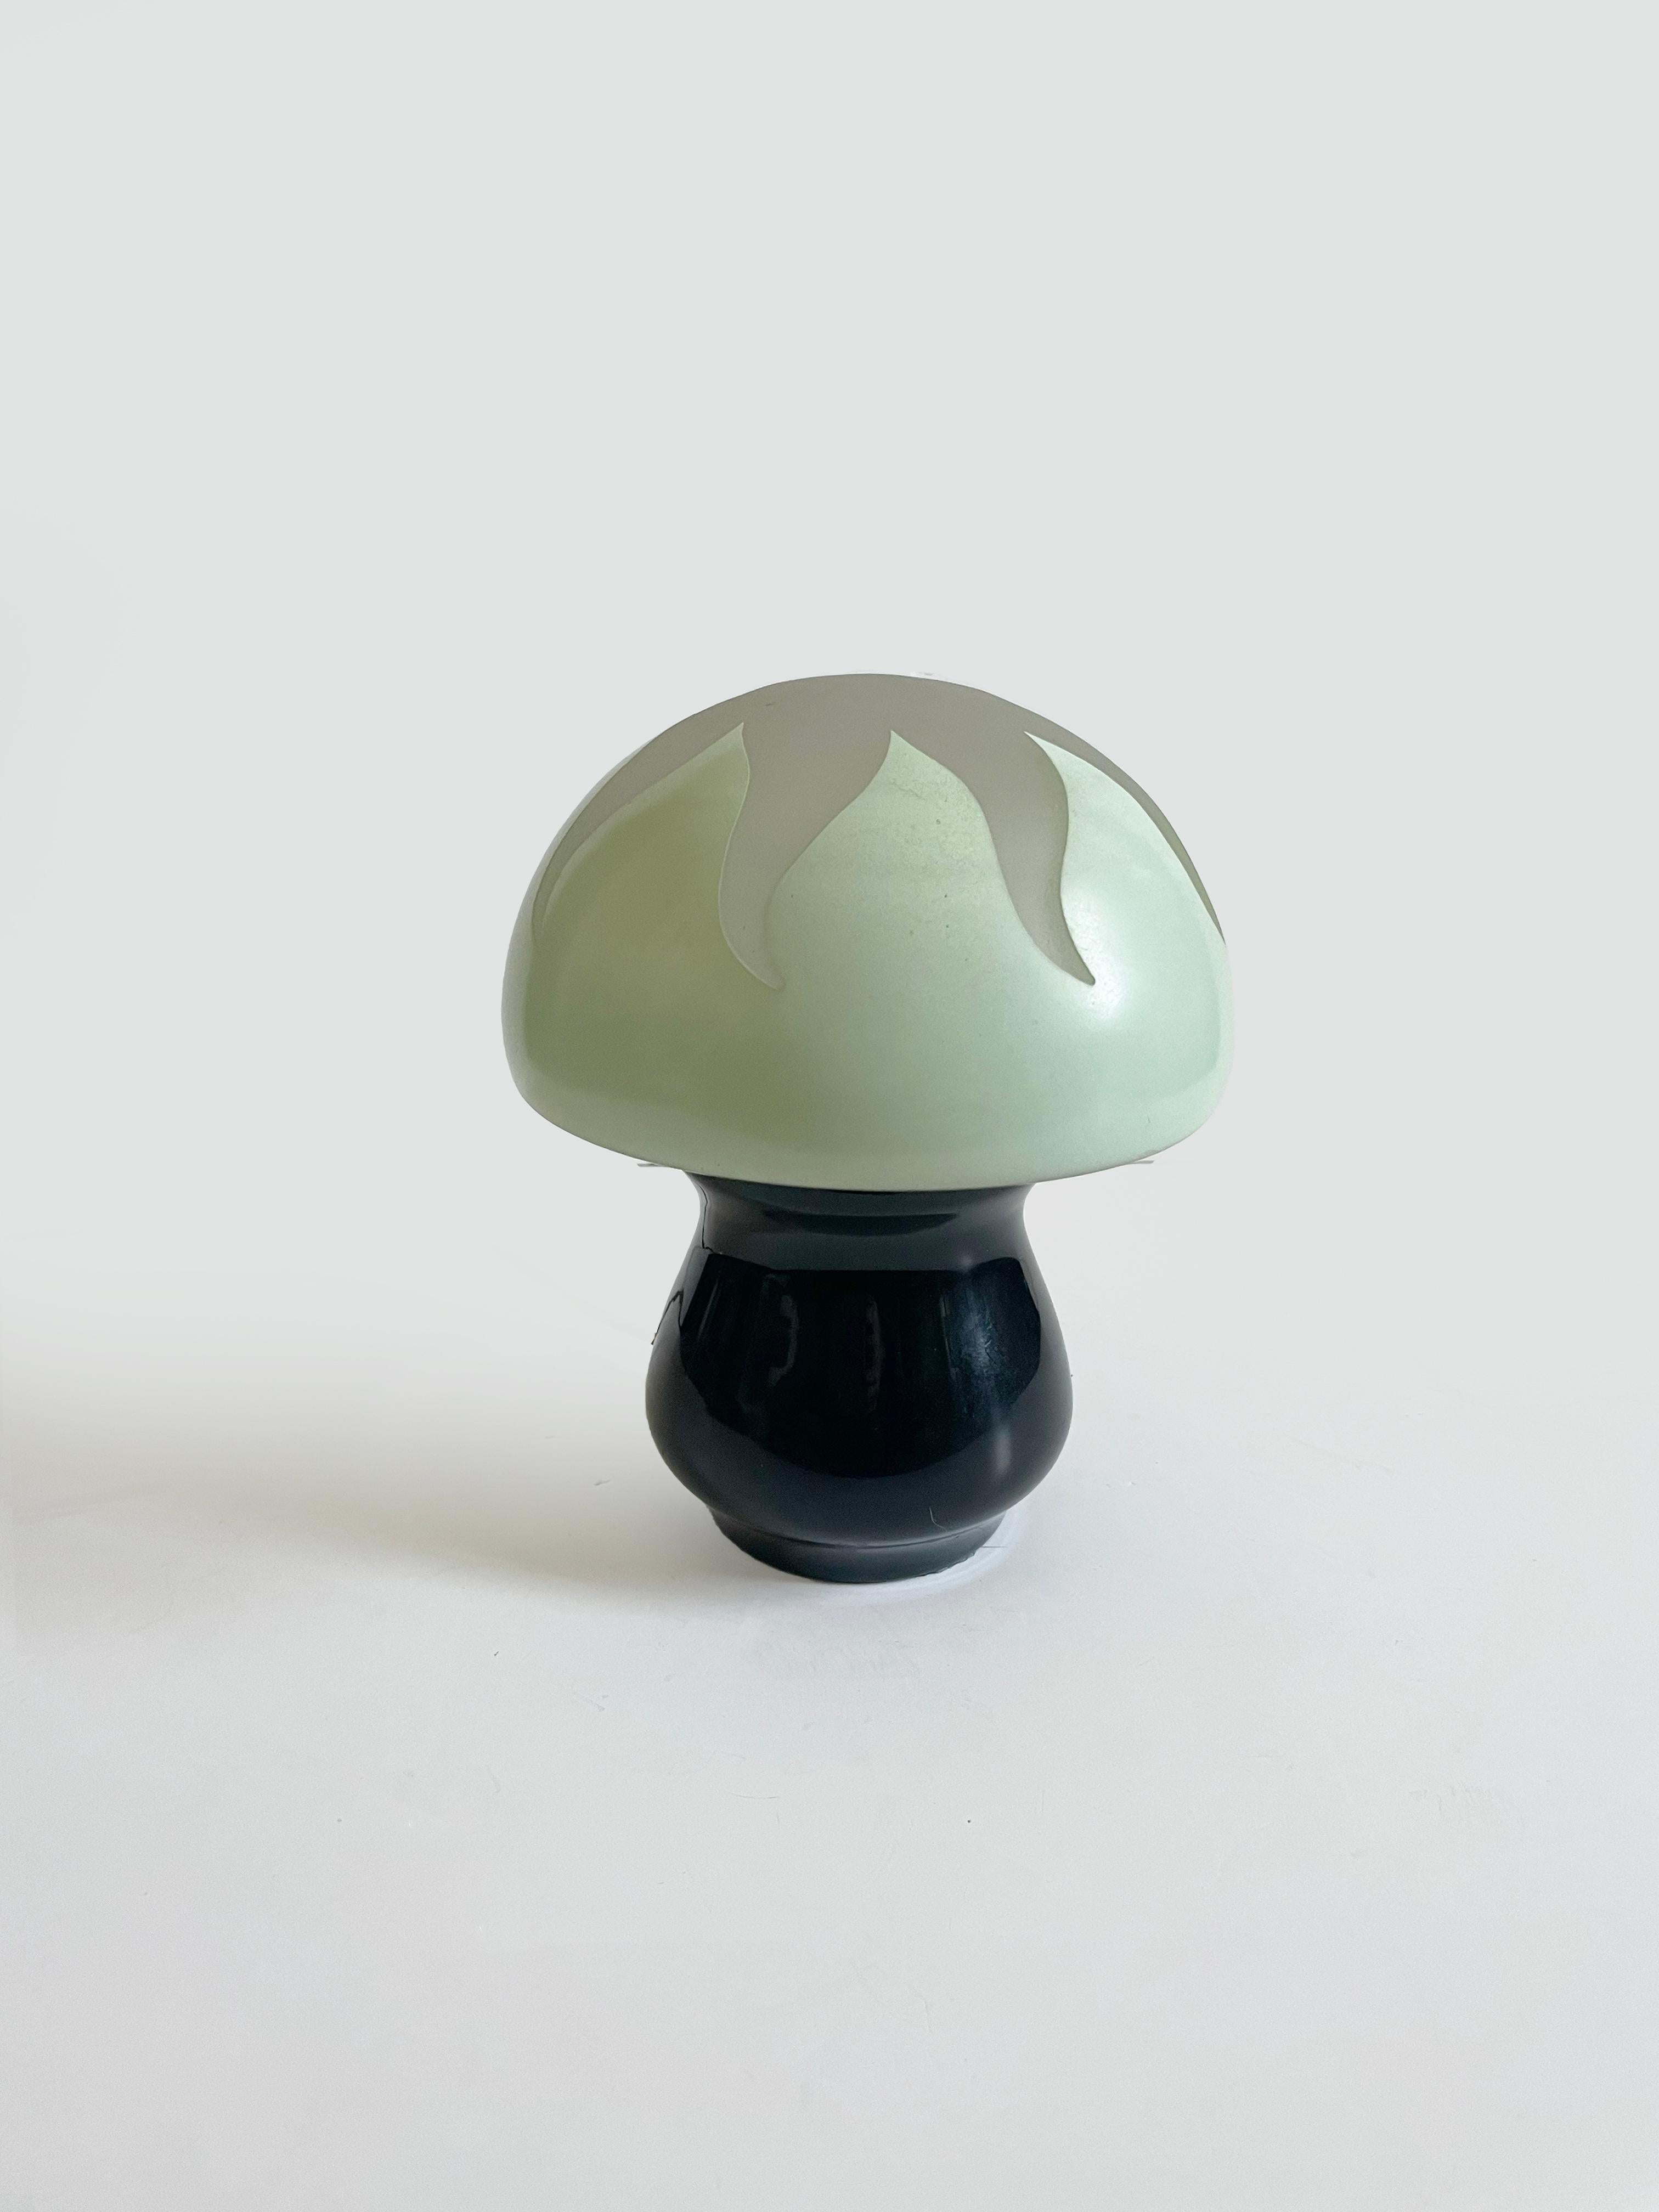 Unique little glass mushroom lamp ca. 1970 France. Features a frosted sun motif on its top and measures 7